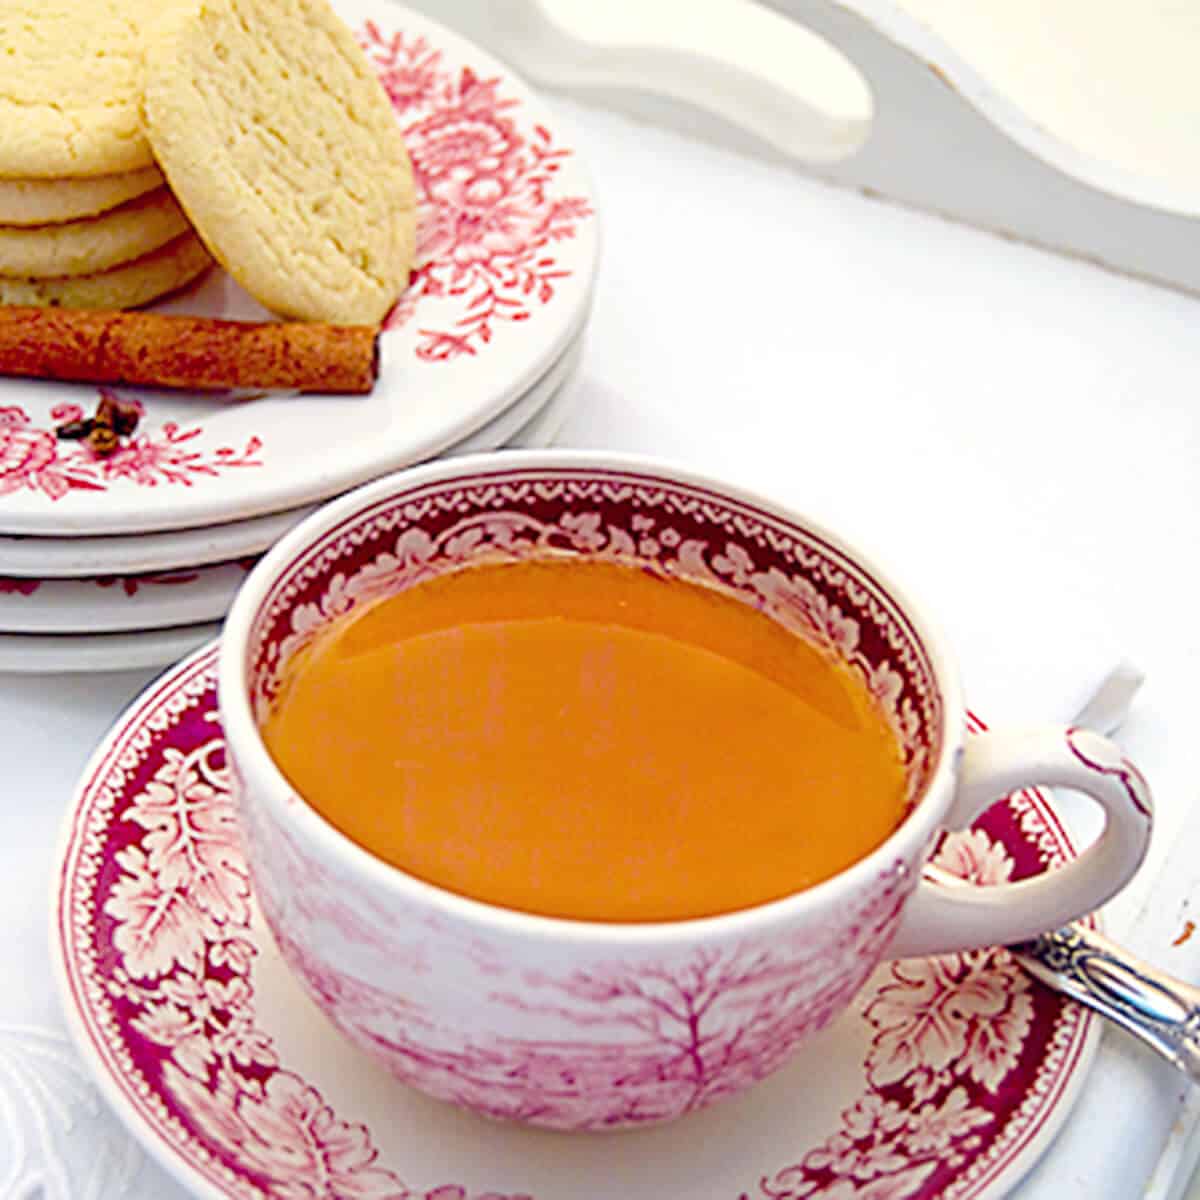 A cup of hot spiced tea with a plate of cookies in the background.